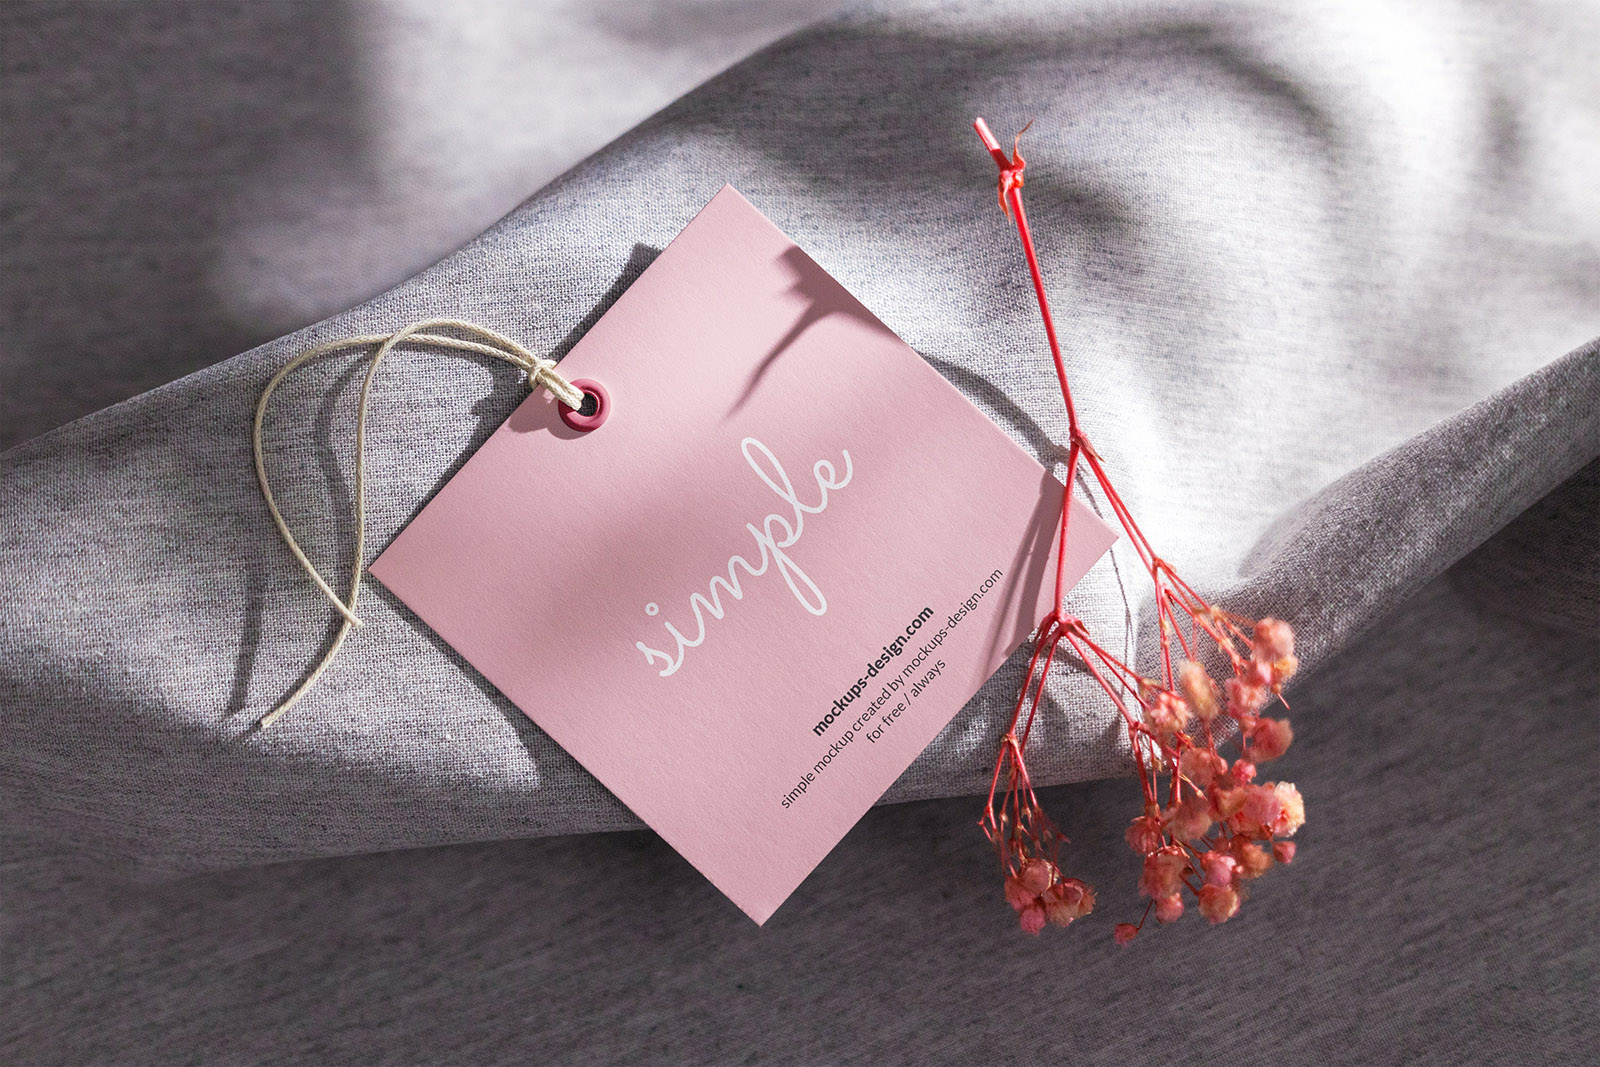 Square label tag on material mockup